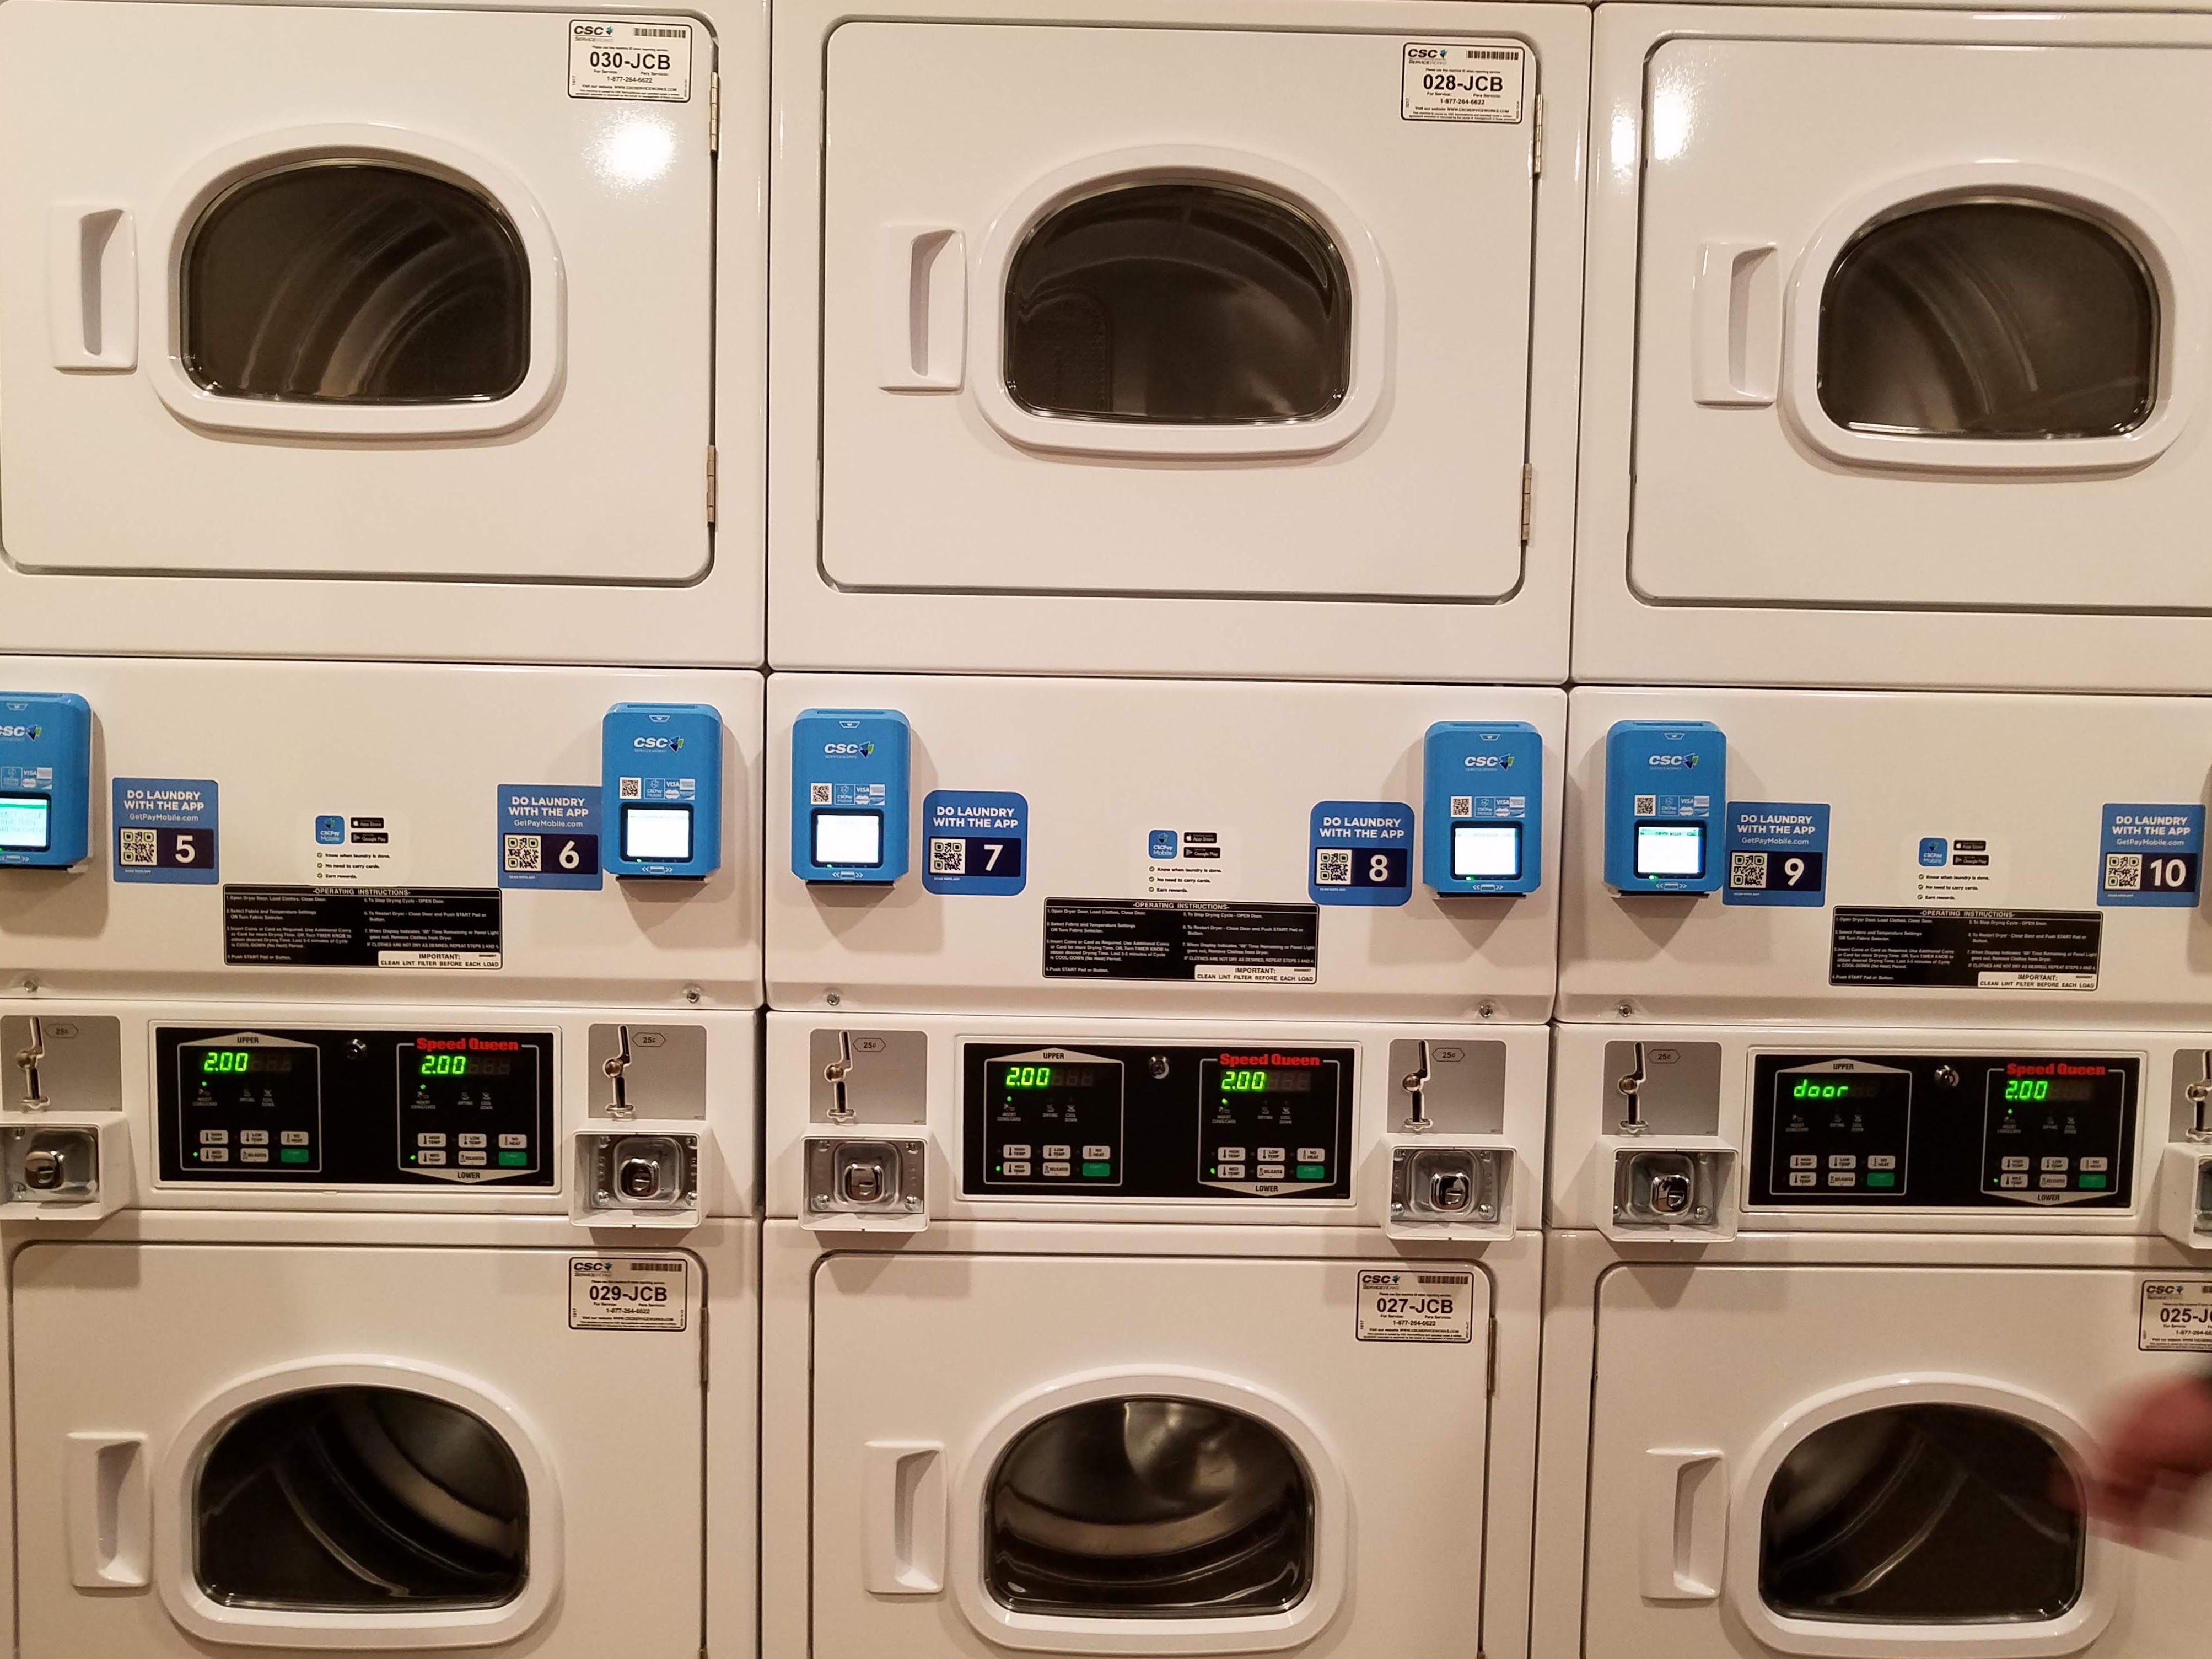 Extended Stay America laundry